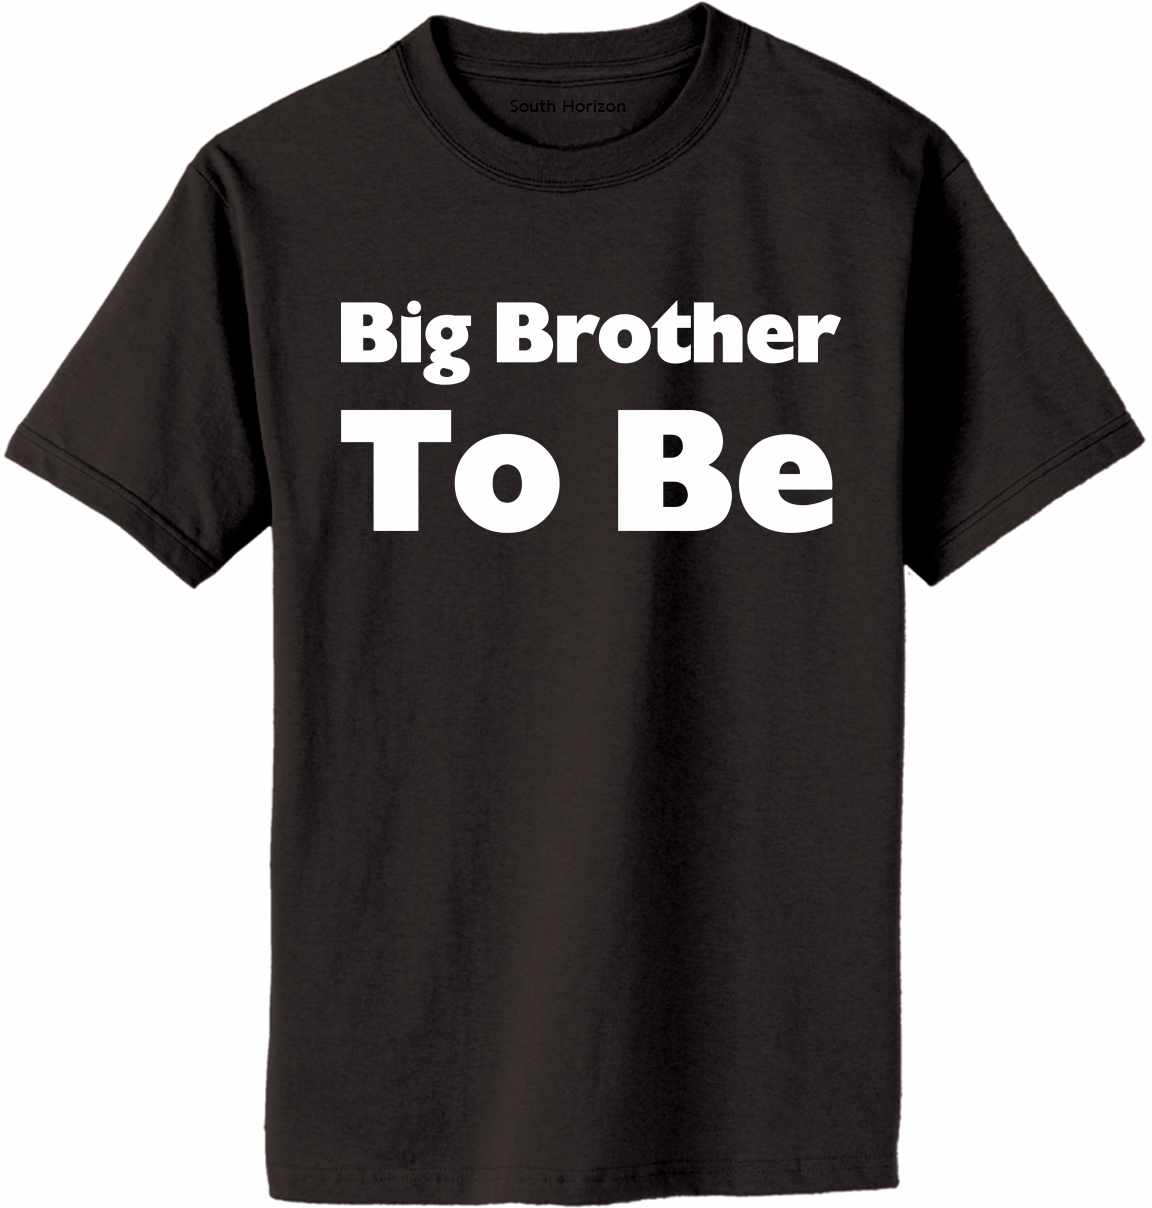 Big Brother To Be Adult T-Shirt